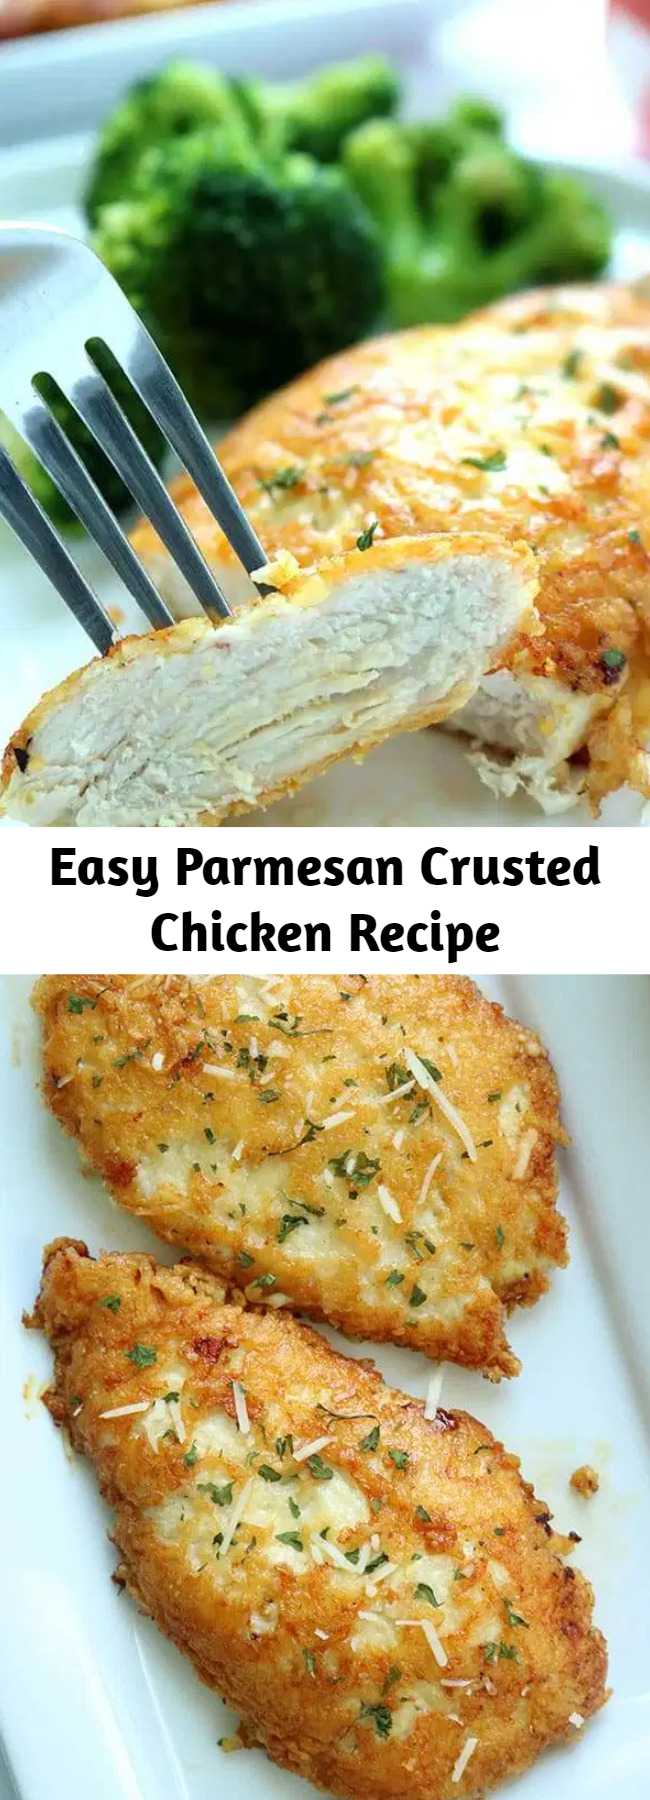 Easy Parmesan Crusted Chicken Recipe - This Parmesan Crusted Chicken is an easy meal idea. We use pounded thin chicken breasts, coat in a delicious Parmesan coating, and then fried to make them crispy. Add this chicken idea to your dinner this week.